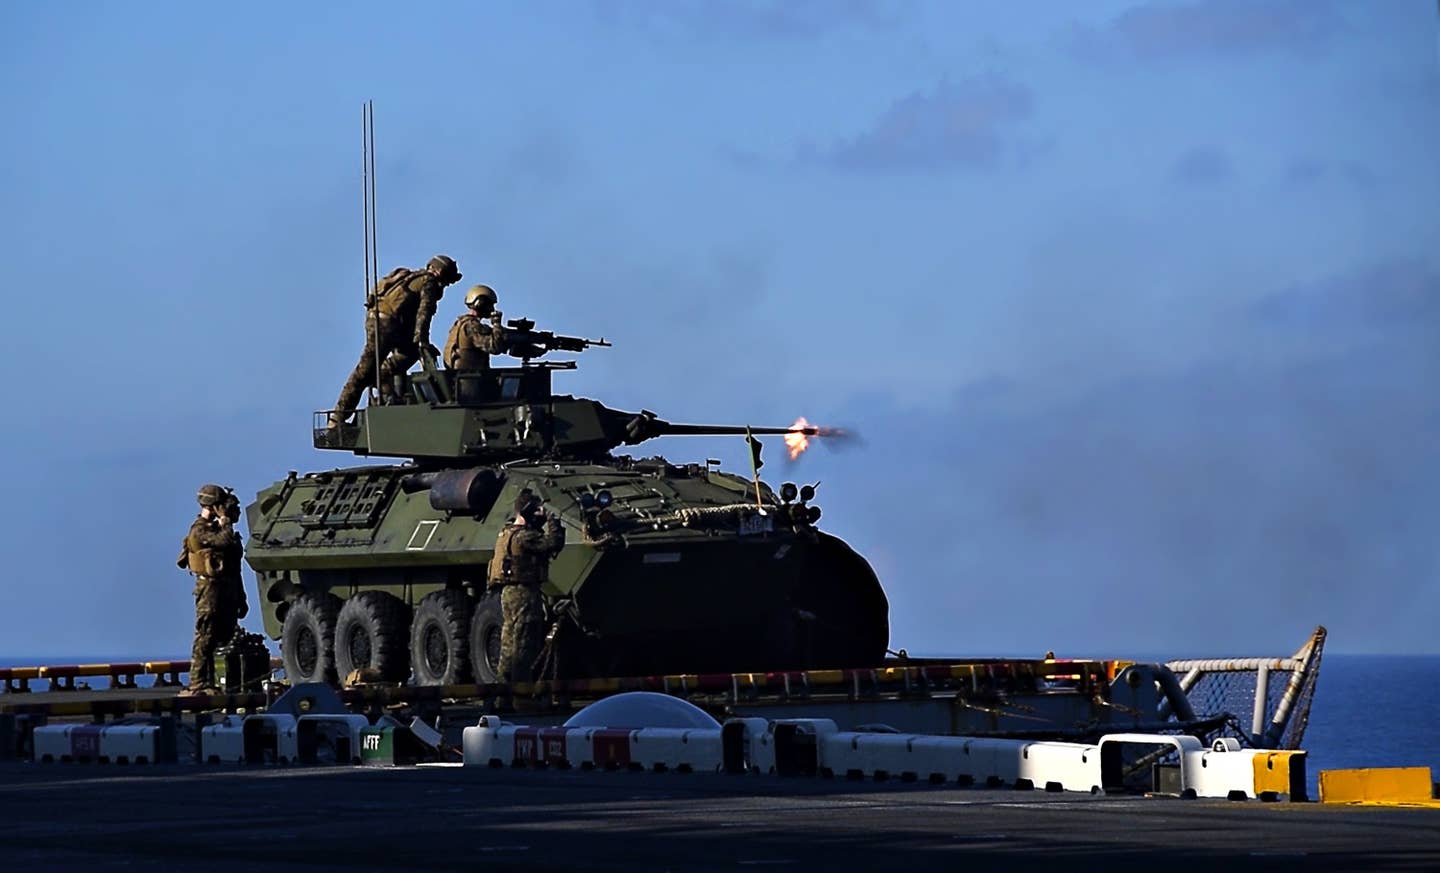 Marines fire the main gun of the LAV-25 during gunnery training. This impressive bit of armor is super useful, but it's still smaller, less armored, and less powerful than a main battle tank.<br>(U.S. Navy Petty Officer 1st Class Daniel Barker)